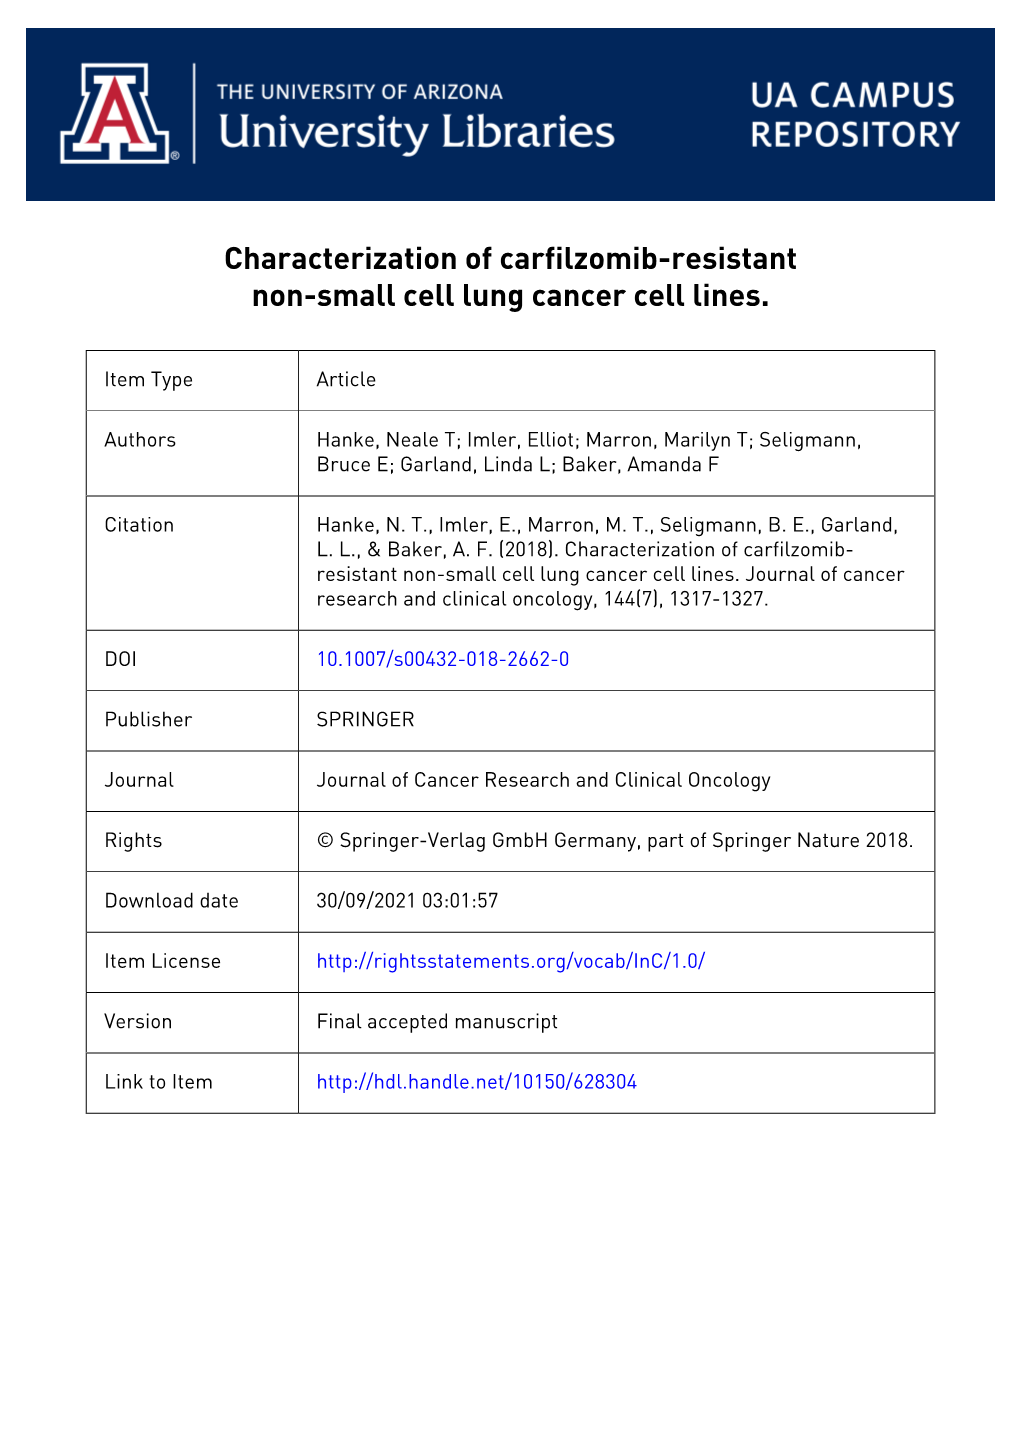 Carfilzomib-Resistant Non-Small Cell Lung Cancer Cell Lines